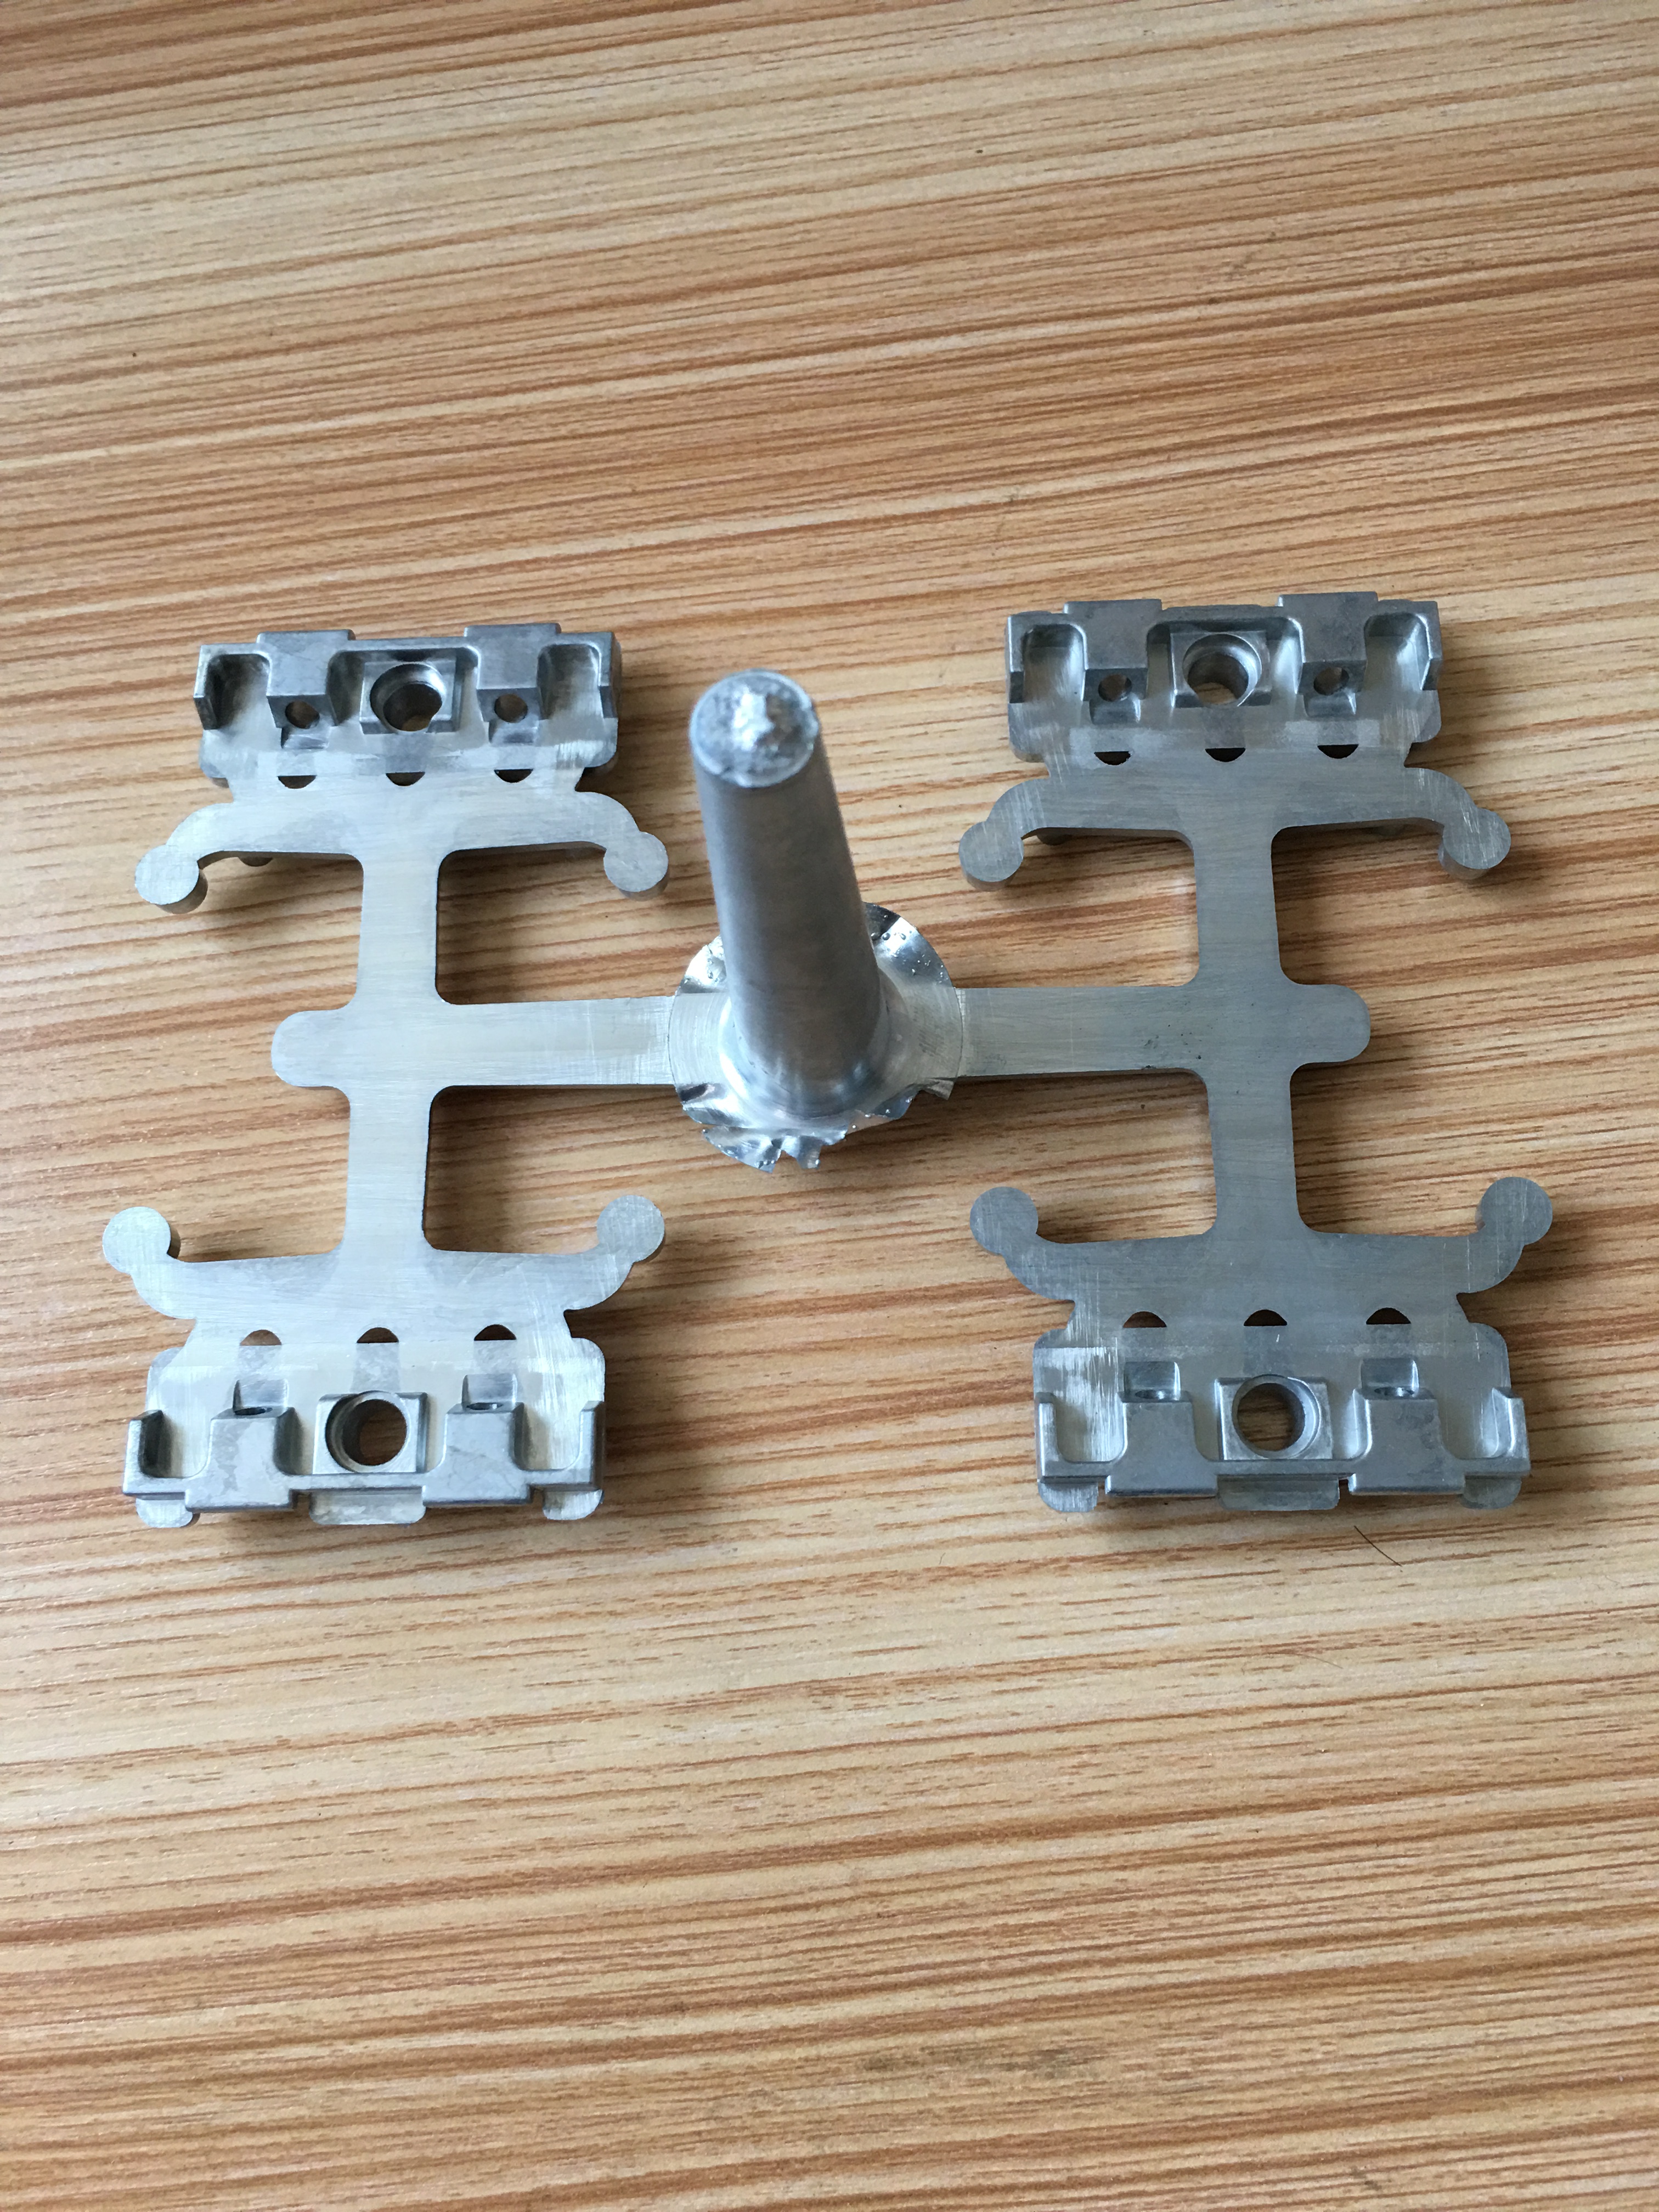 How can oem 3d printed injection mold tooling factories address potential design defects?